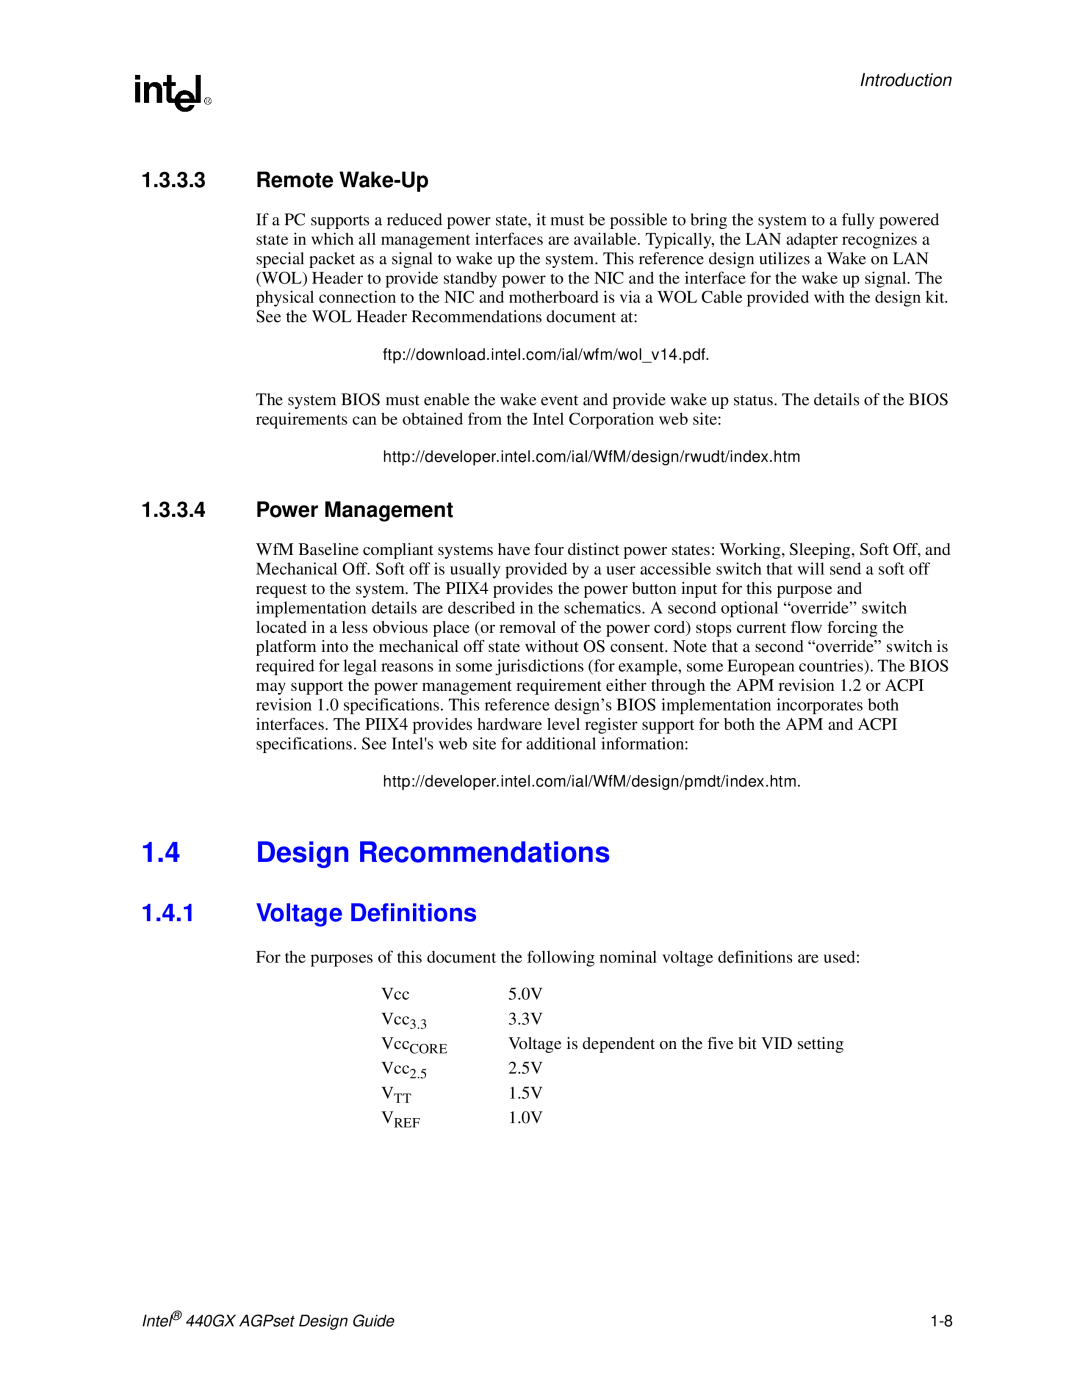 Intel 440GX manual Design Recommendations, Voltage Definitions, Remote Wake-Up, Power Management, Introduction 